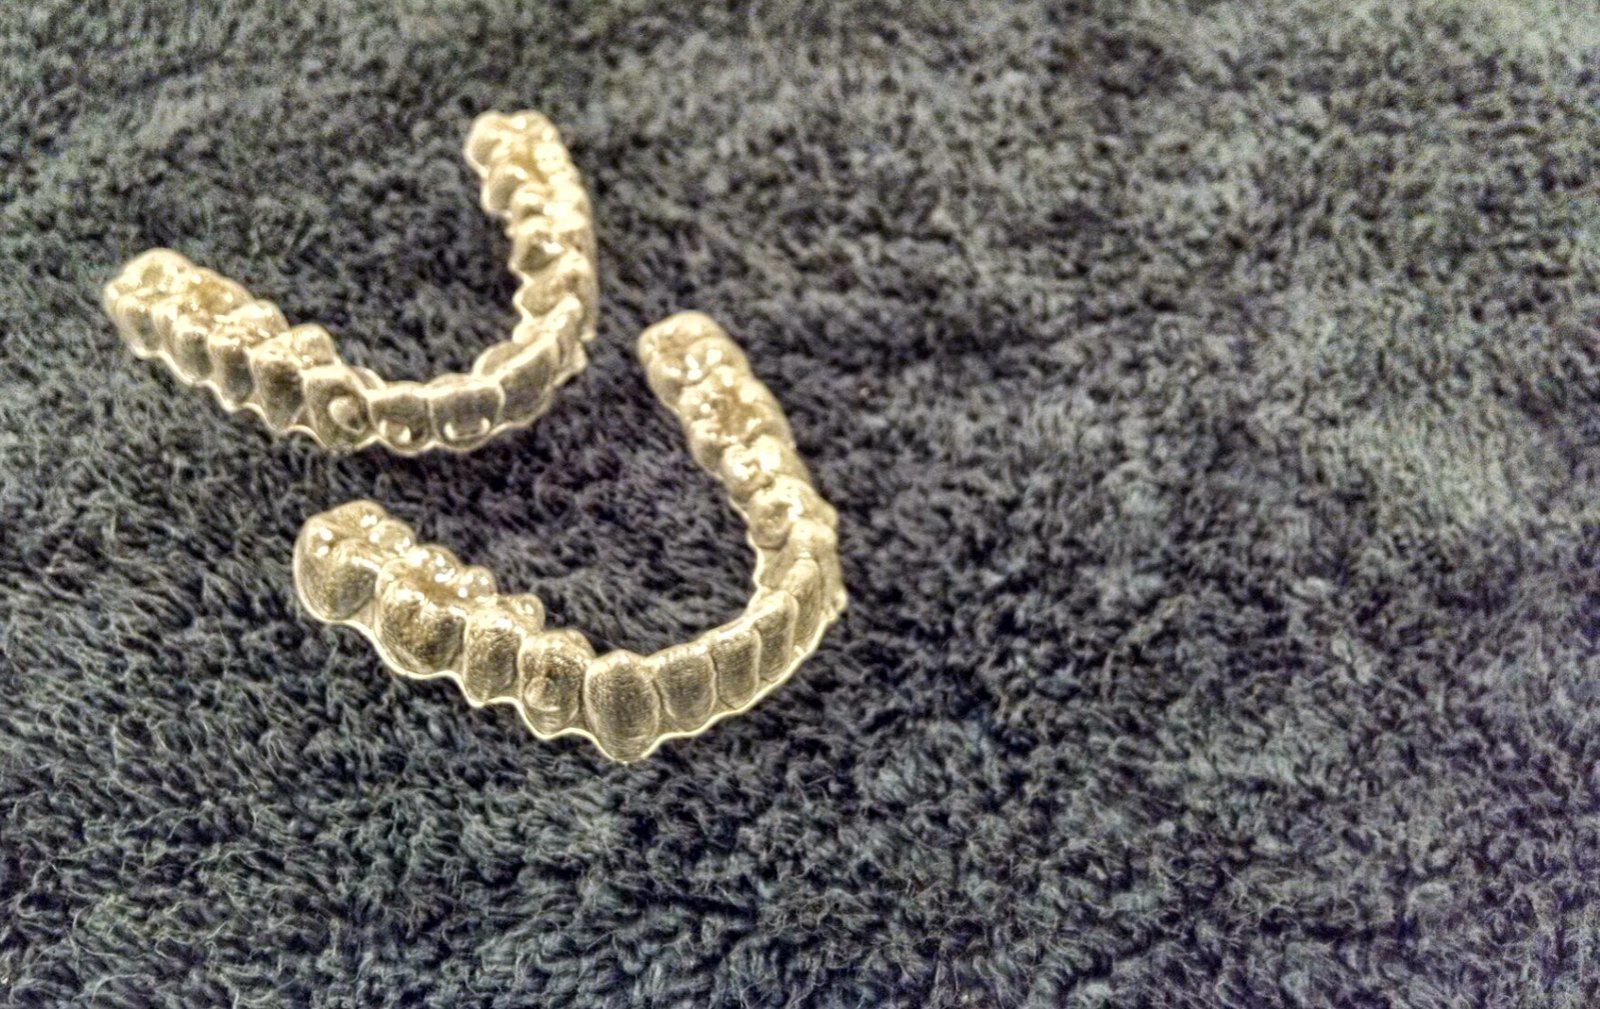 Yellowed Invisalign trays improperly placed on carpet instead of in their case while eating